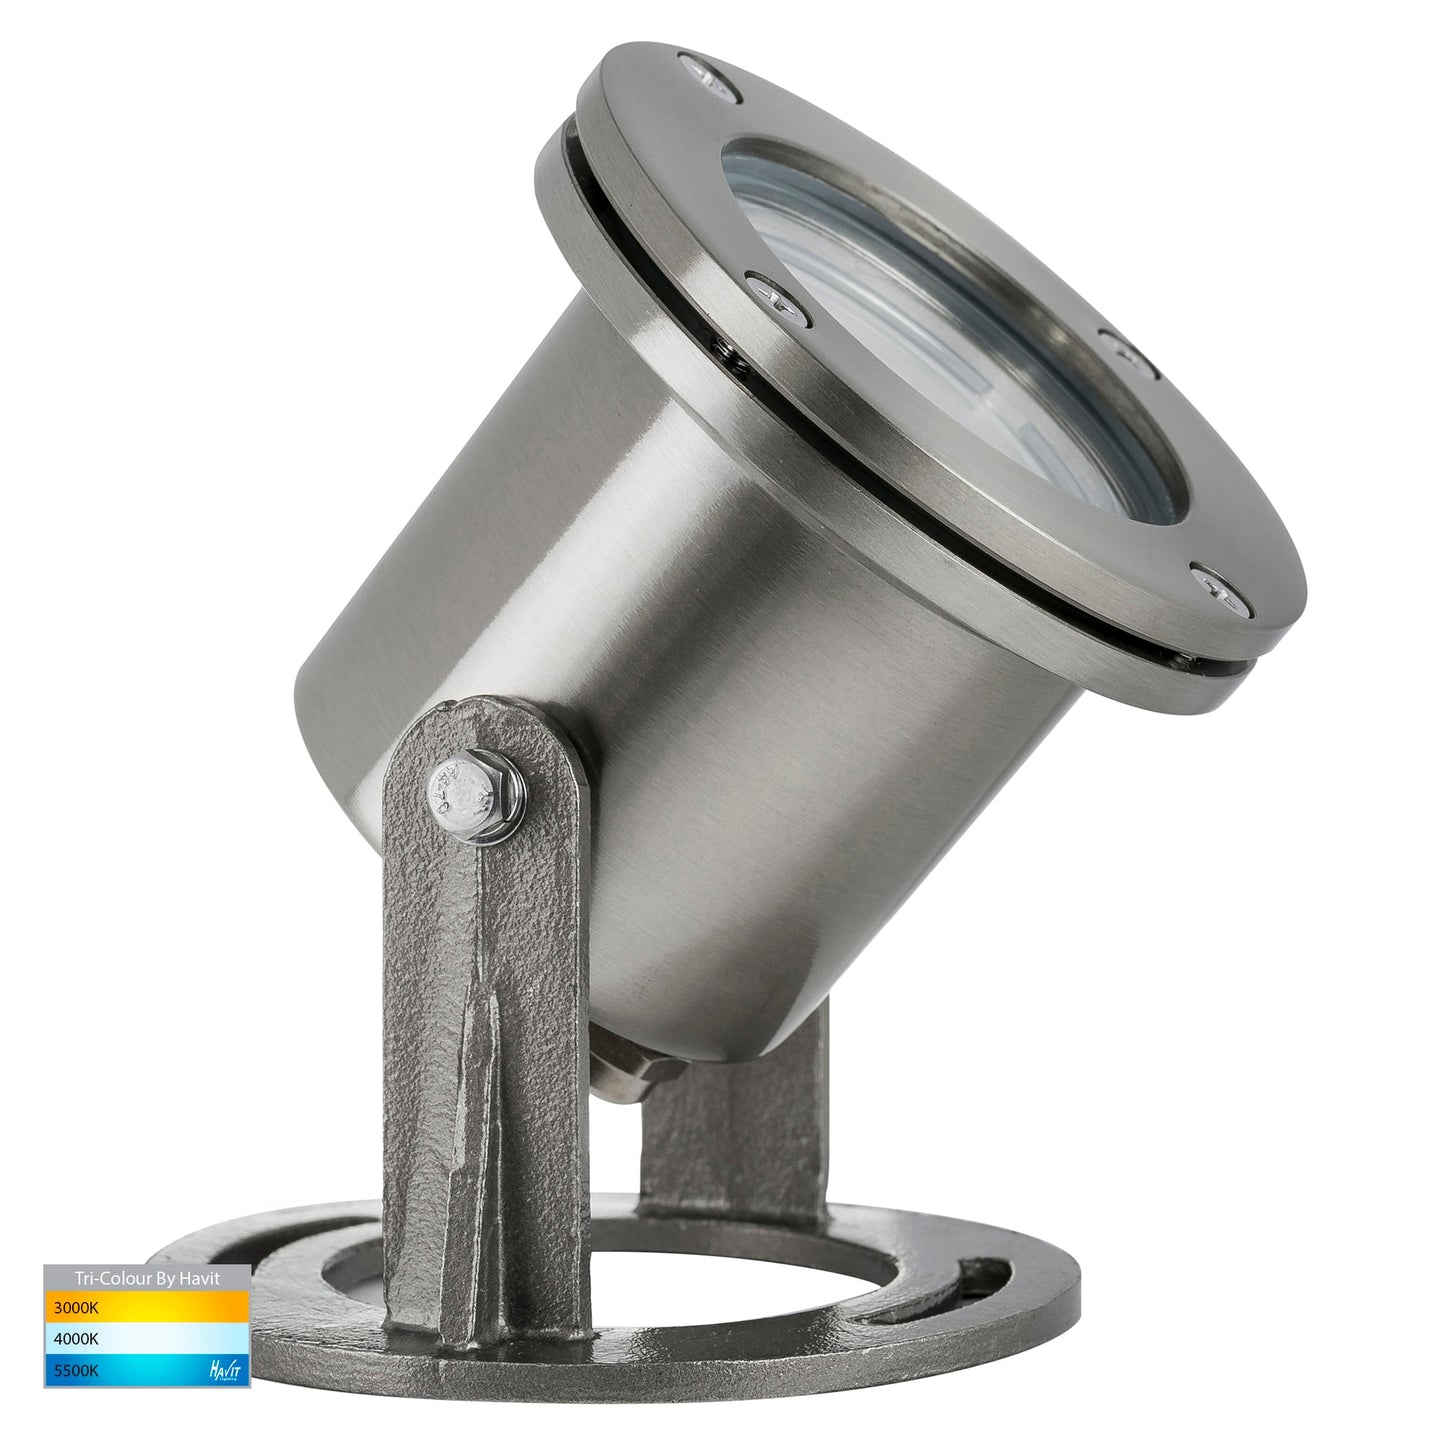 Submersible Pond Light Ip68 316 Stainless Steel  HV1491t